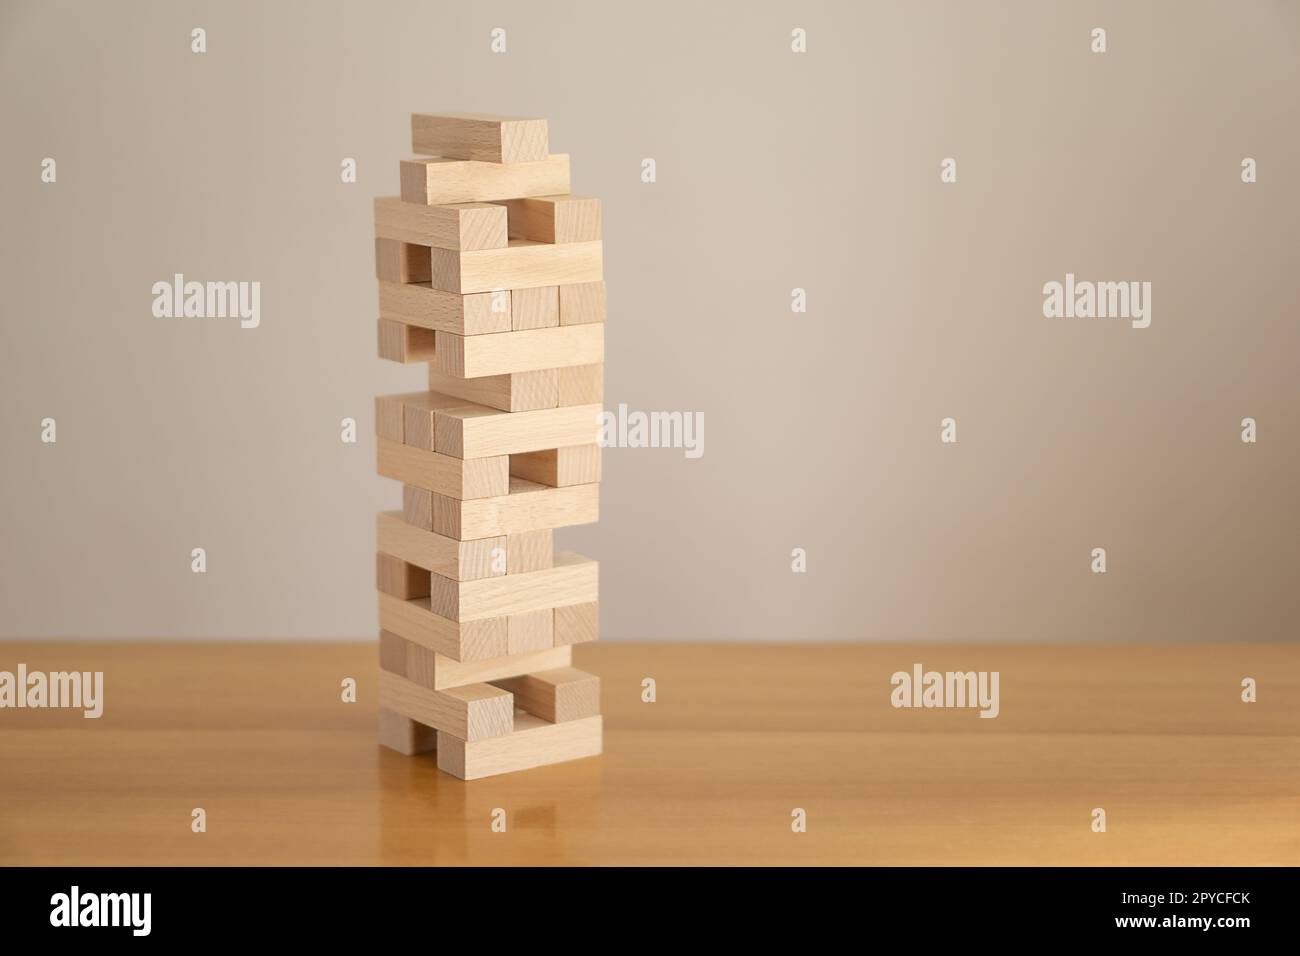 Tower of wood blocks. Concept of education, development, growth and risk. Stock Photo